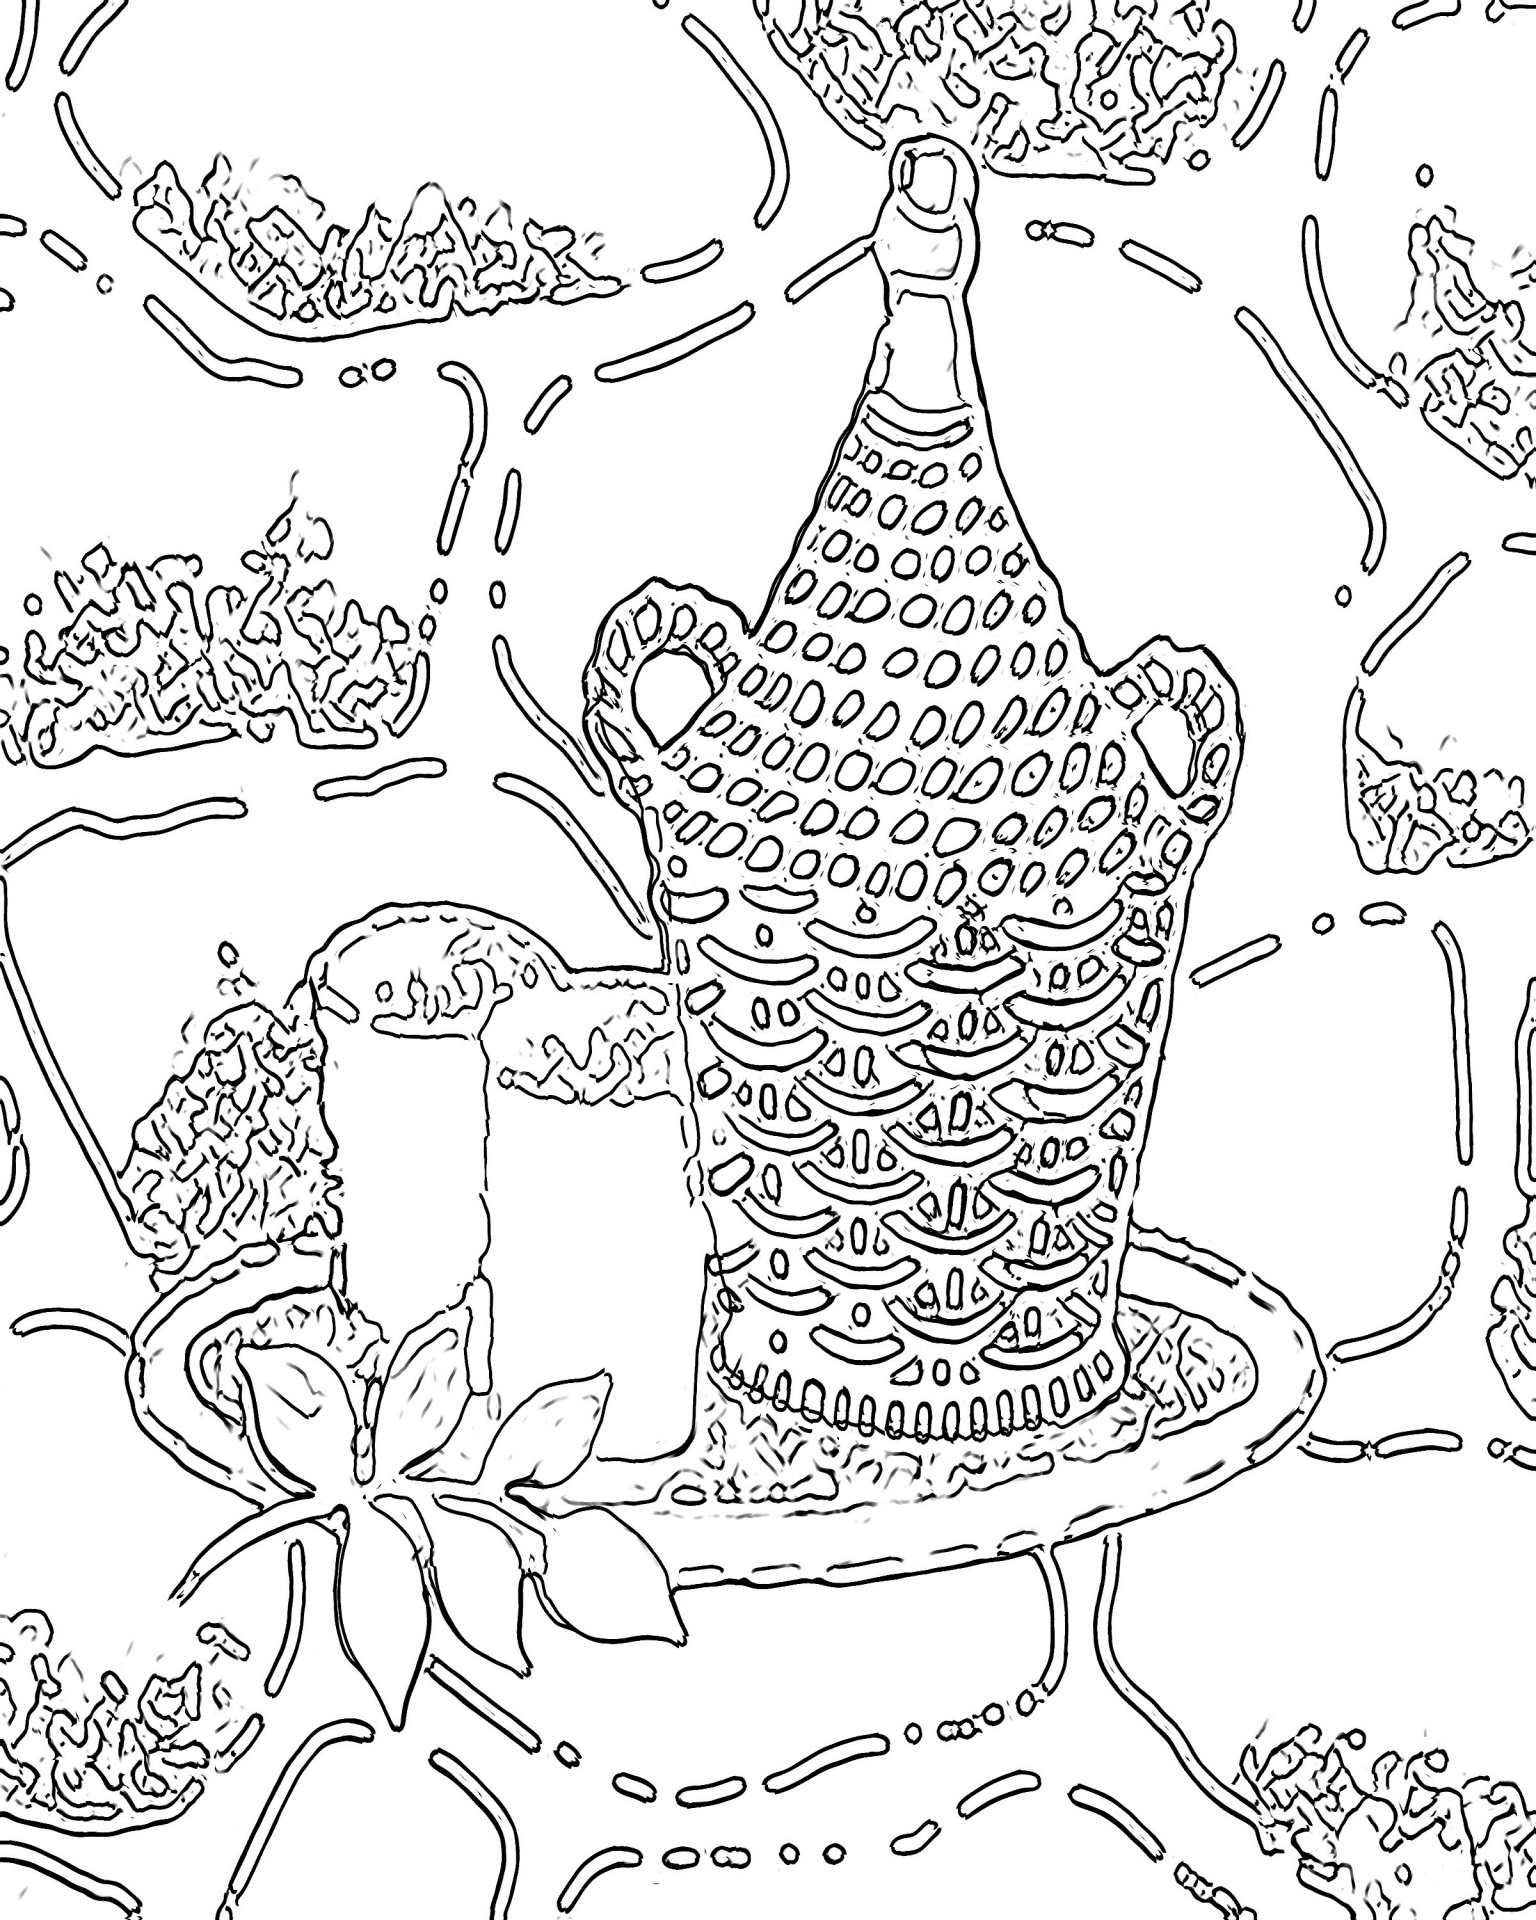 Free Printable Abstract Coloring Pages For Adults Effy Moom Free Coloring Picture wallpaper give a chance to color on the wall without getting in trouble! Fill the walls of your home or office with stress-relieving [effymoom.blogspot.com]